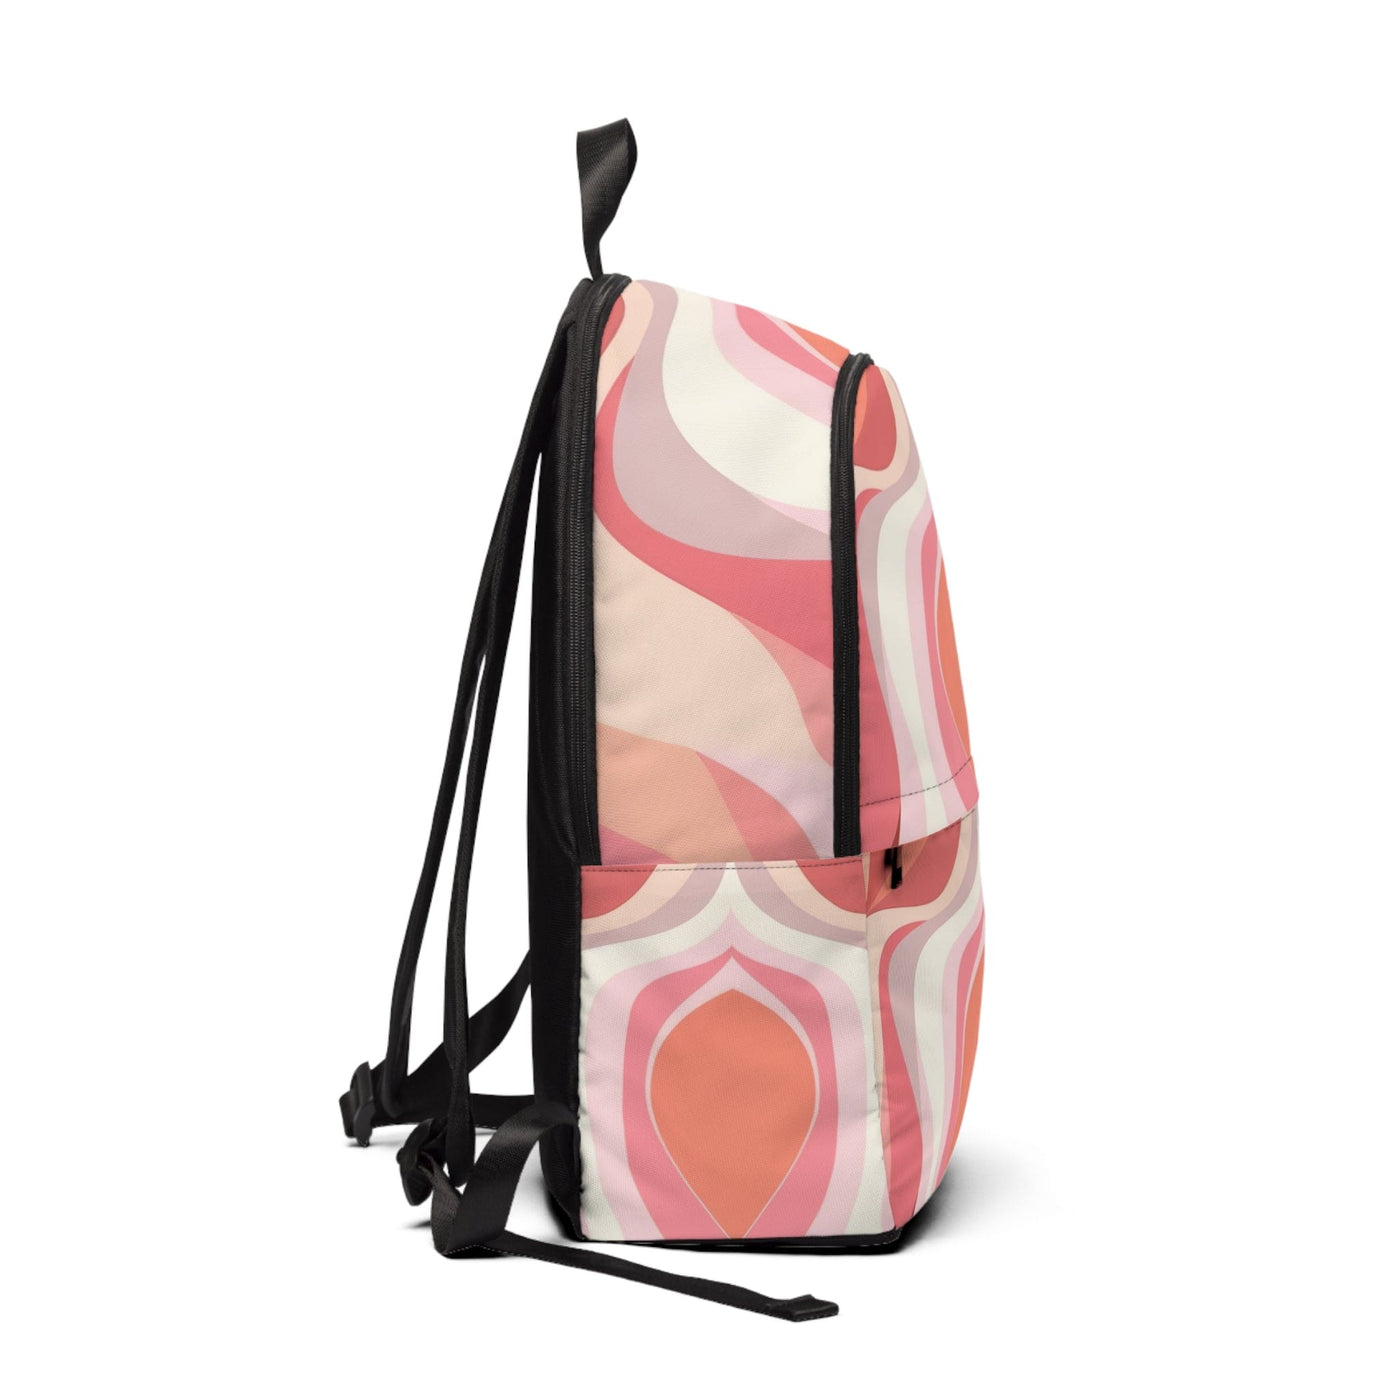 Fashion Backpack Waterproof Boho Pink And White Contemporary Art Lined Pattern